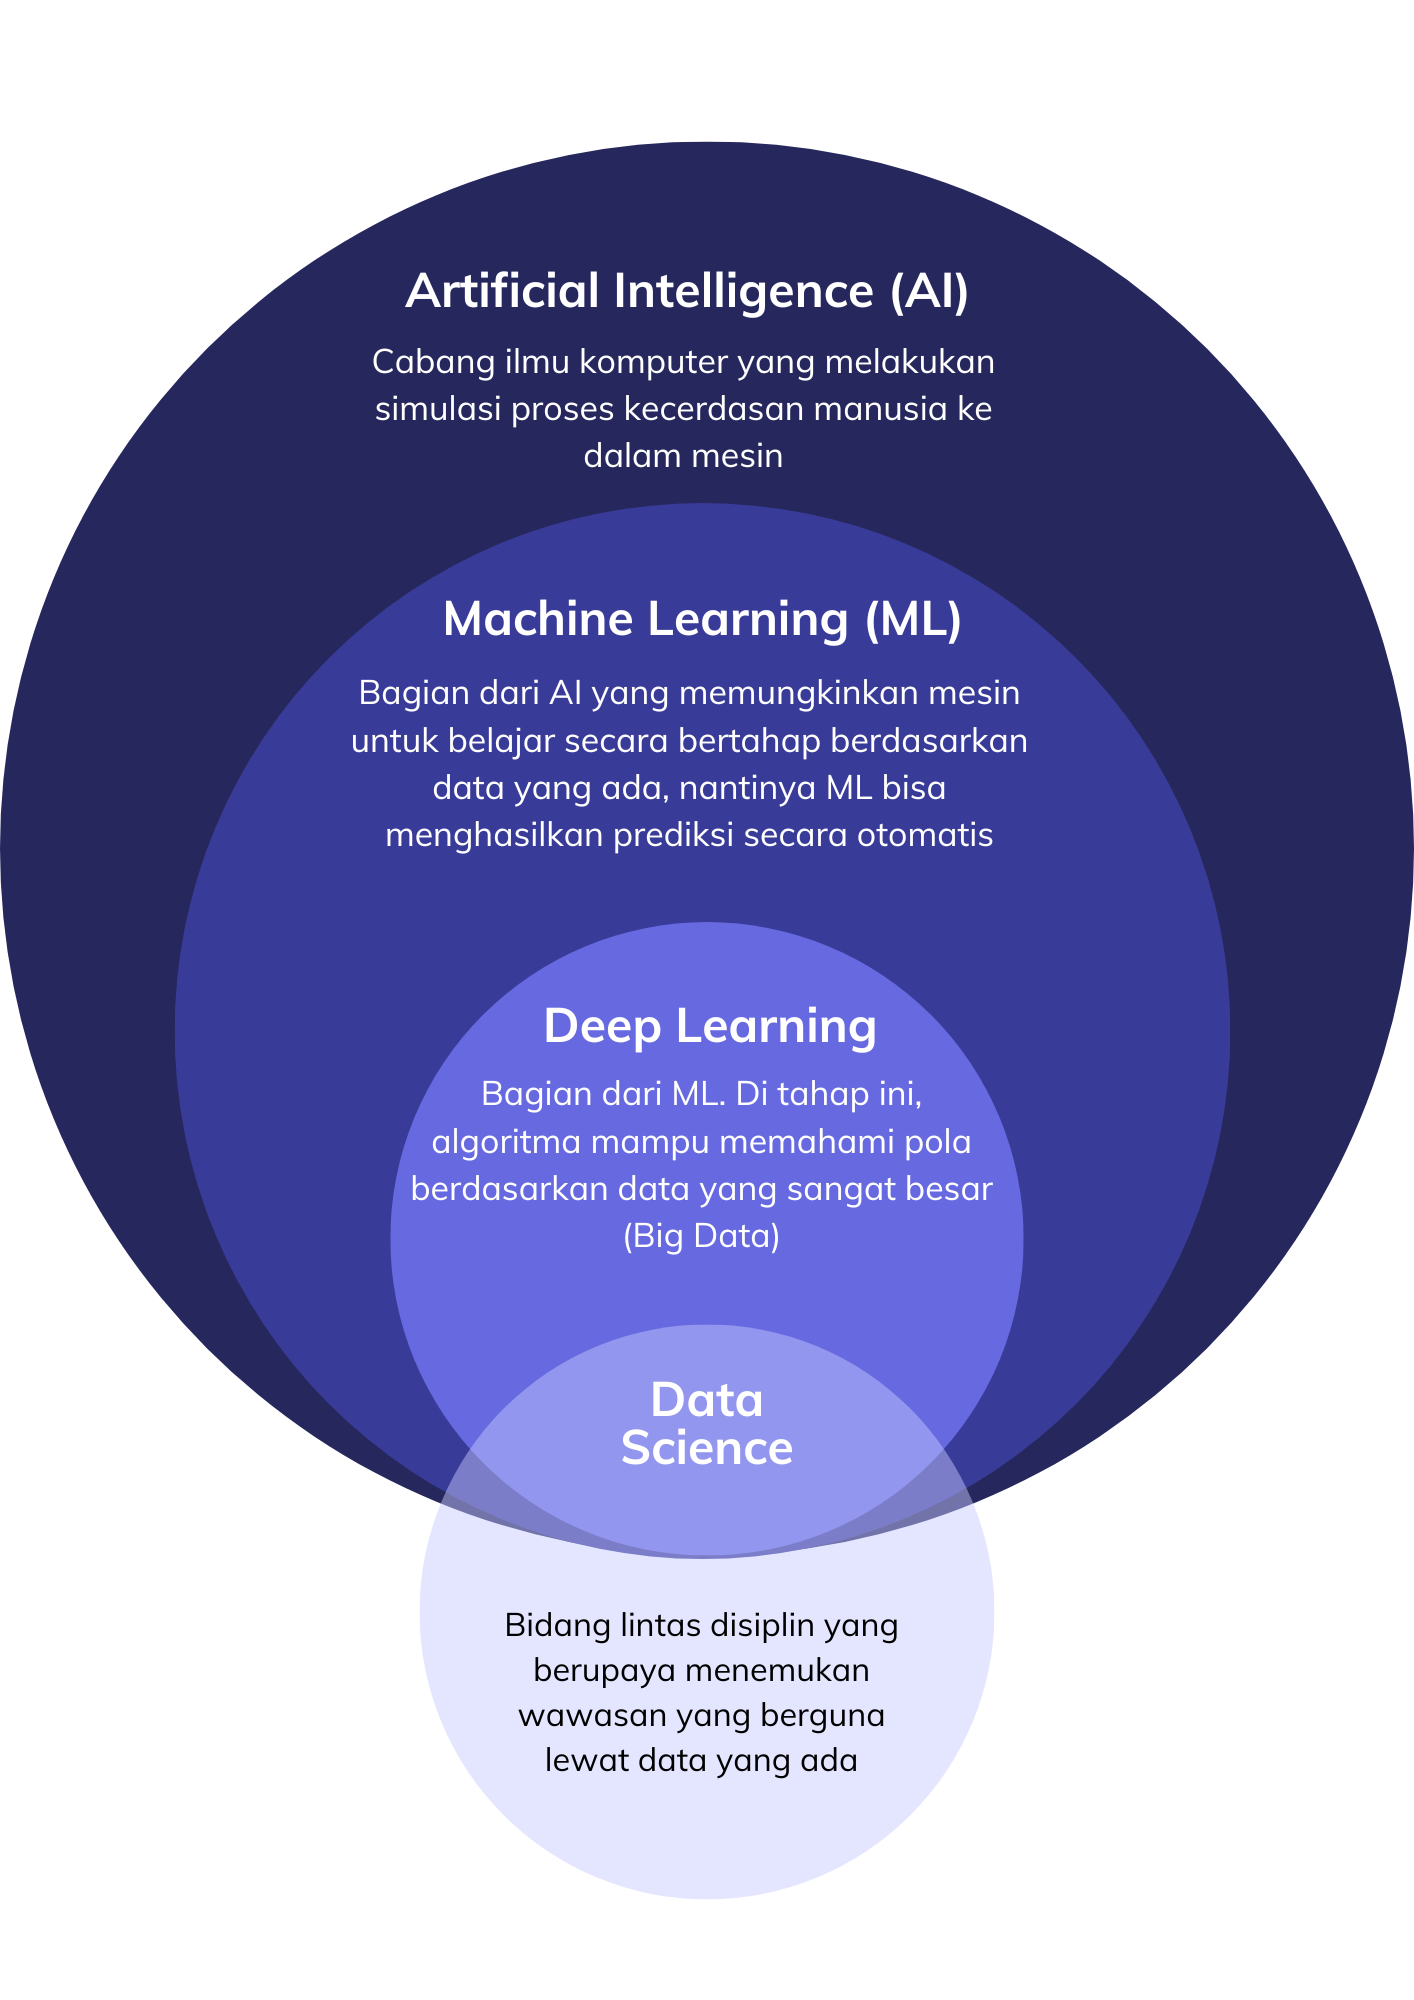 Perbedaan AI, Machine Learning, Deep Learning, Data Science